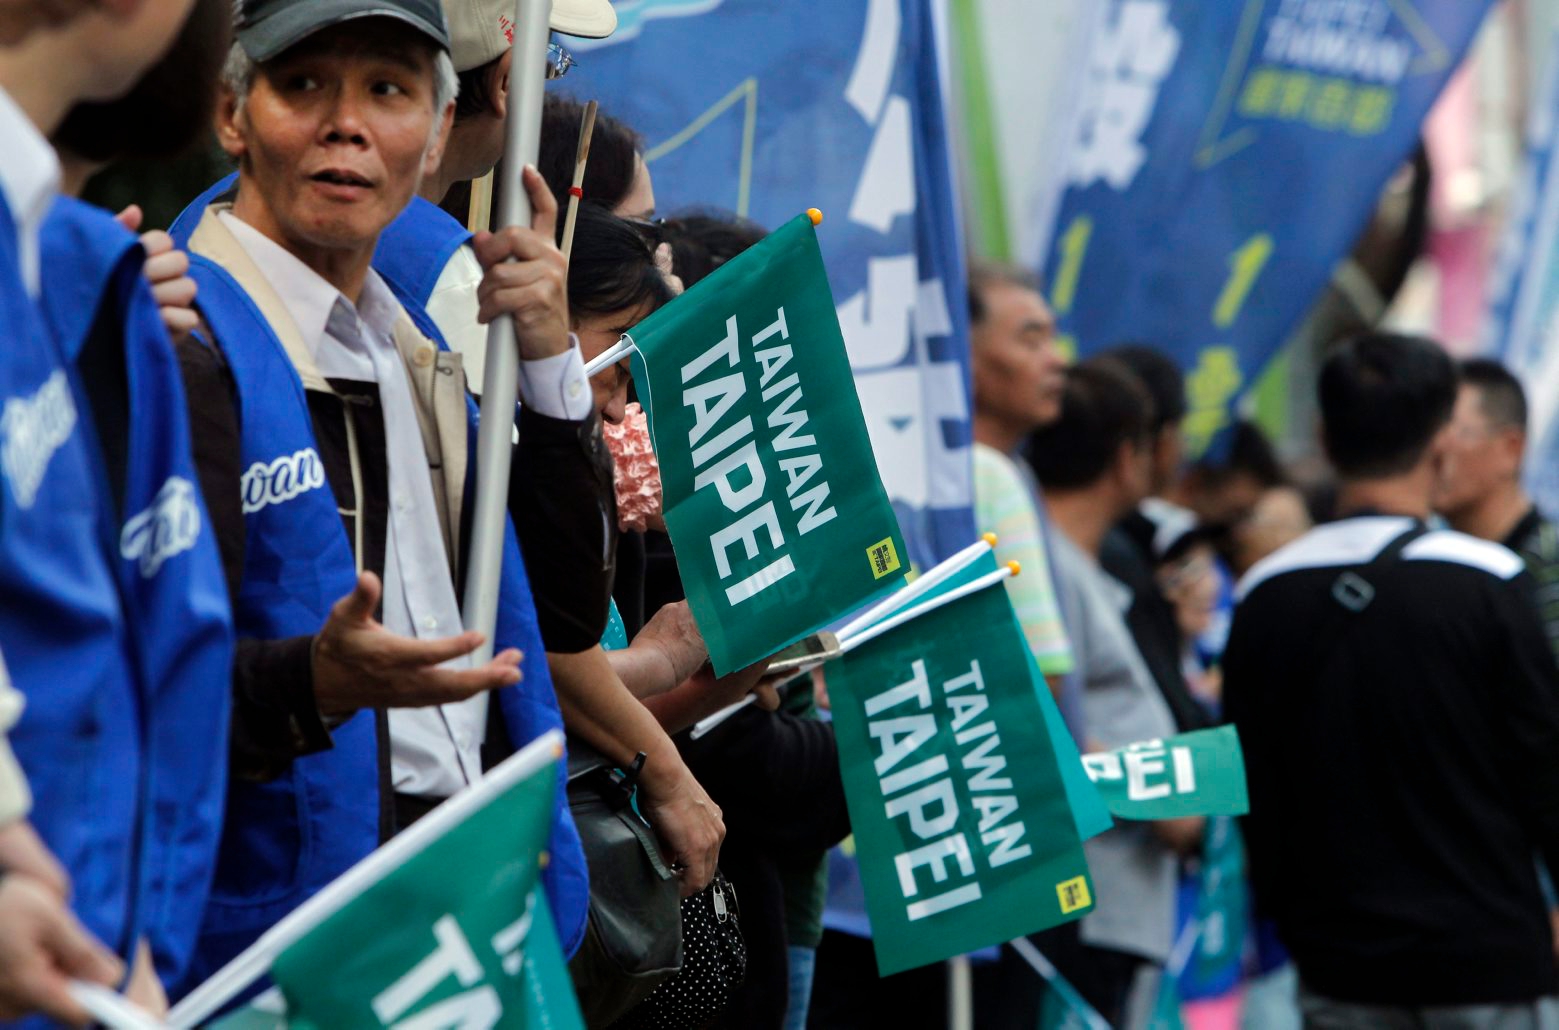 In this Nov. 3, 2018, photo, supporters hold "Taiwan Taipei" flags during a rally for a referendum asking if national teams, including ones for the Olympics, should go by the name "Taiwan Taipei" instead of "Chinese Taipei" in Taipei, Taiwan. Taiwan will vote on a referendum this month asking if the self-ruled island should compete as ÄúTaiwanÄù instead of the present ÄúChinese Taipei.Äù This would include the 2020 Olympics in Tokyo. The controversial referendum has angered China, which sees Taiwan as a breakaway province. (AP Photo/Chiang Ying-ying) Taiwan What's In A Name